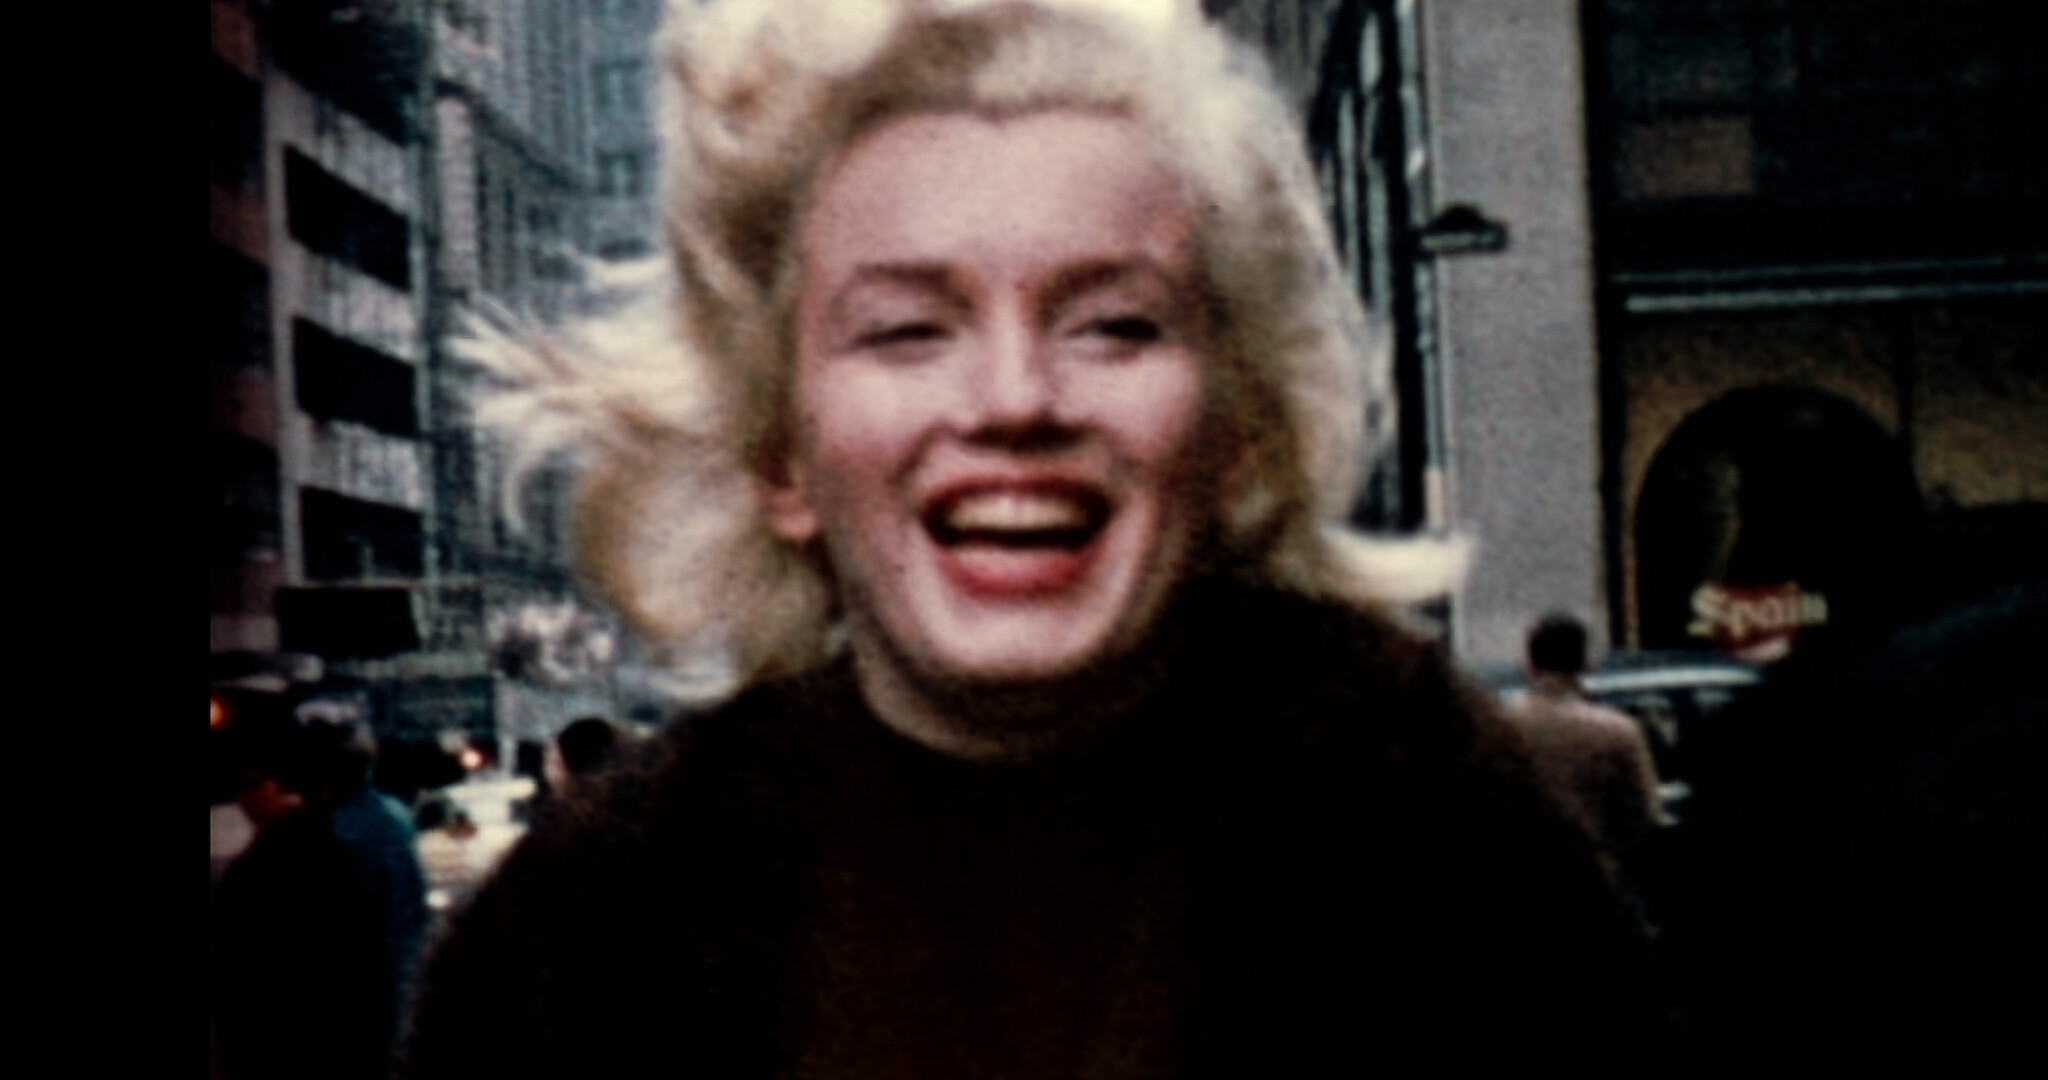 Marilyn Monroe (Actress) - On This Day